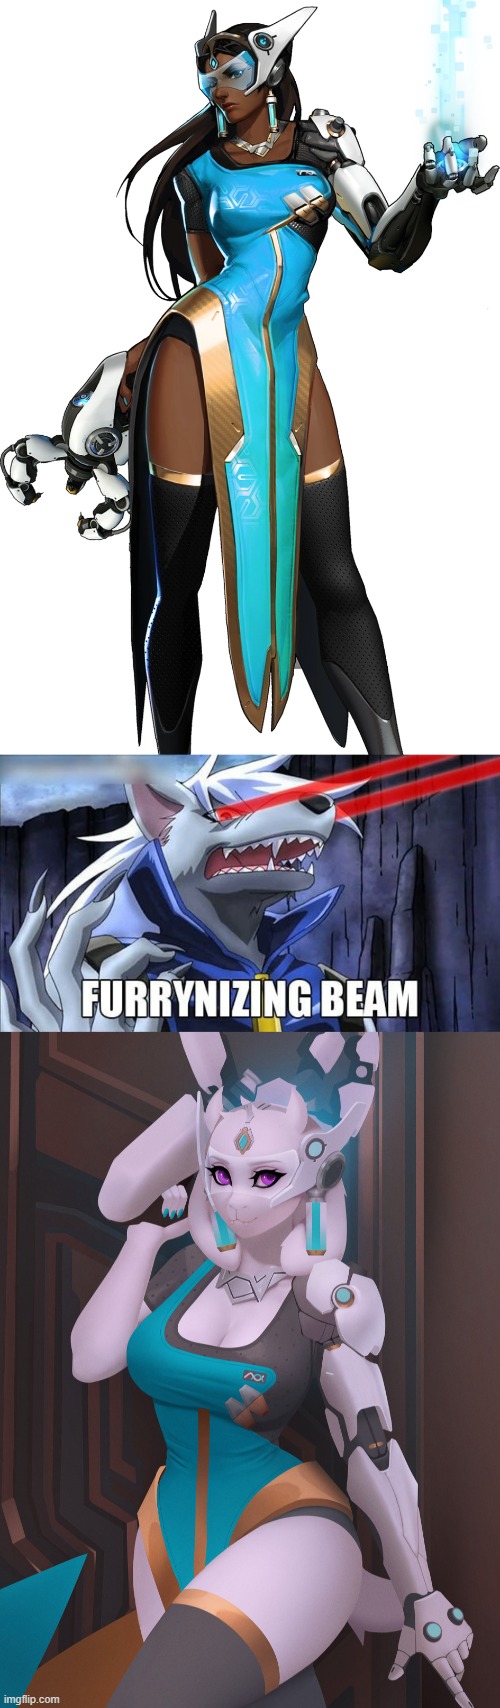 I feel like every Overwatch character is gonna get beamed xD (By Frieder1) | image tagged in furrynizing beam,furry,undertale,overwatch,toriel,memes | made w/ Imgflip meme maker